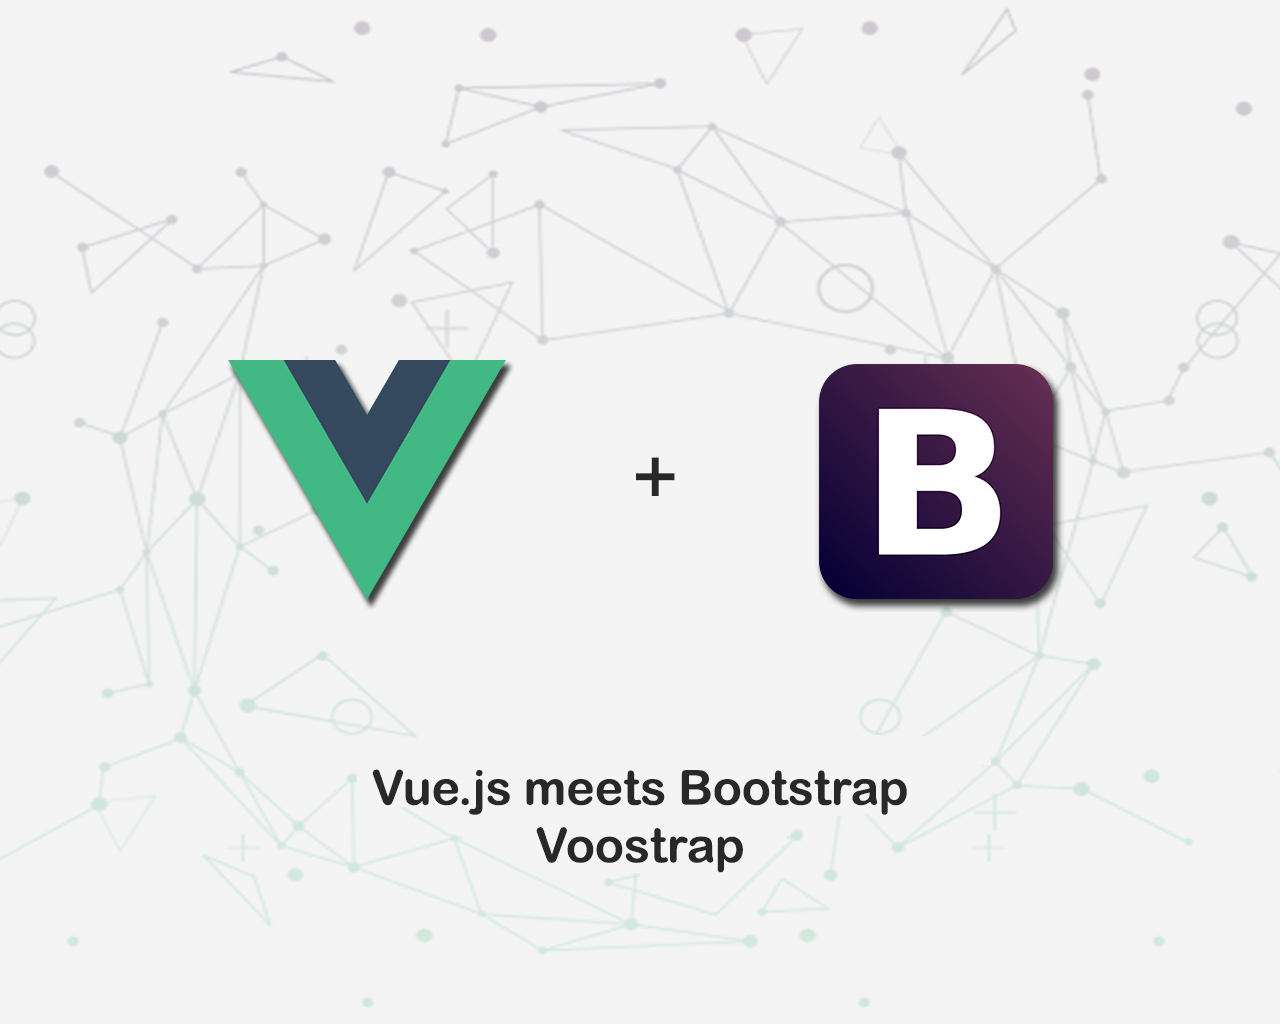 Vue.js meets bootstrap: New project Vootstrap presented